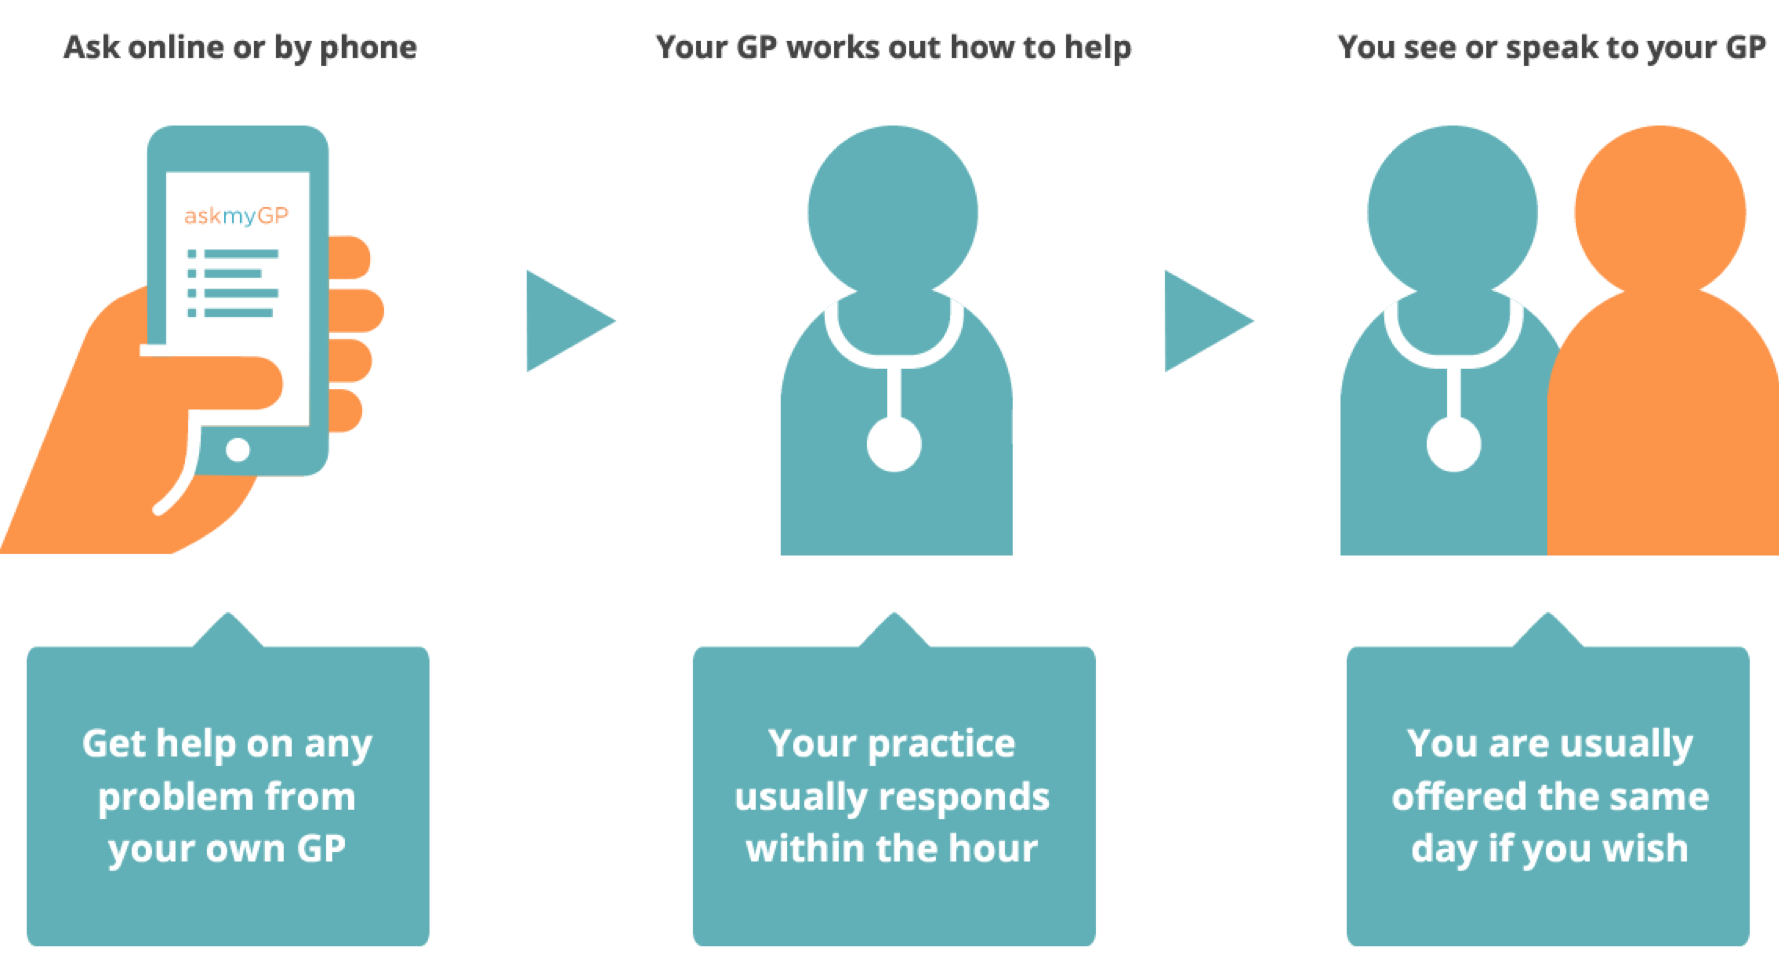 Illustration that explains in pictures how askmyGP works. Contact your GP online and then the team will work out the fastest way for you to get the help you need.